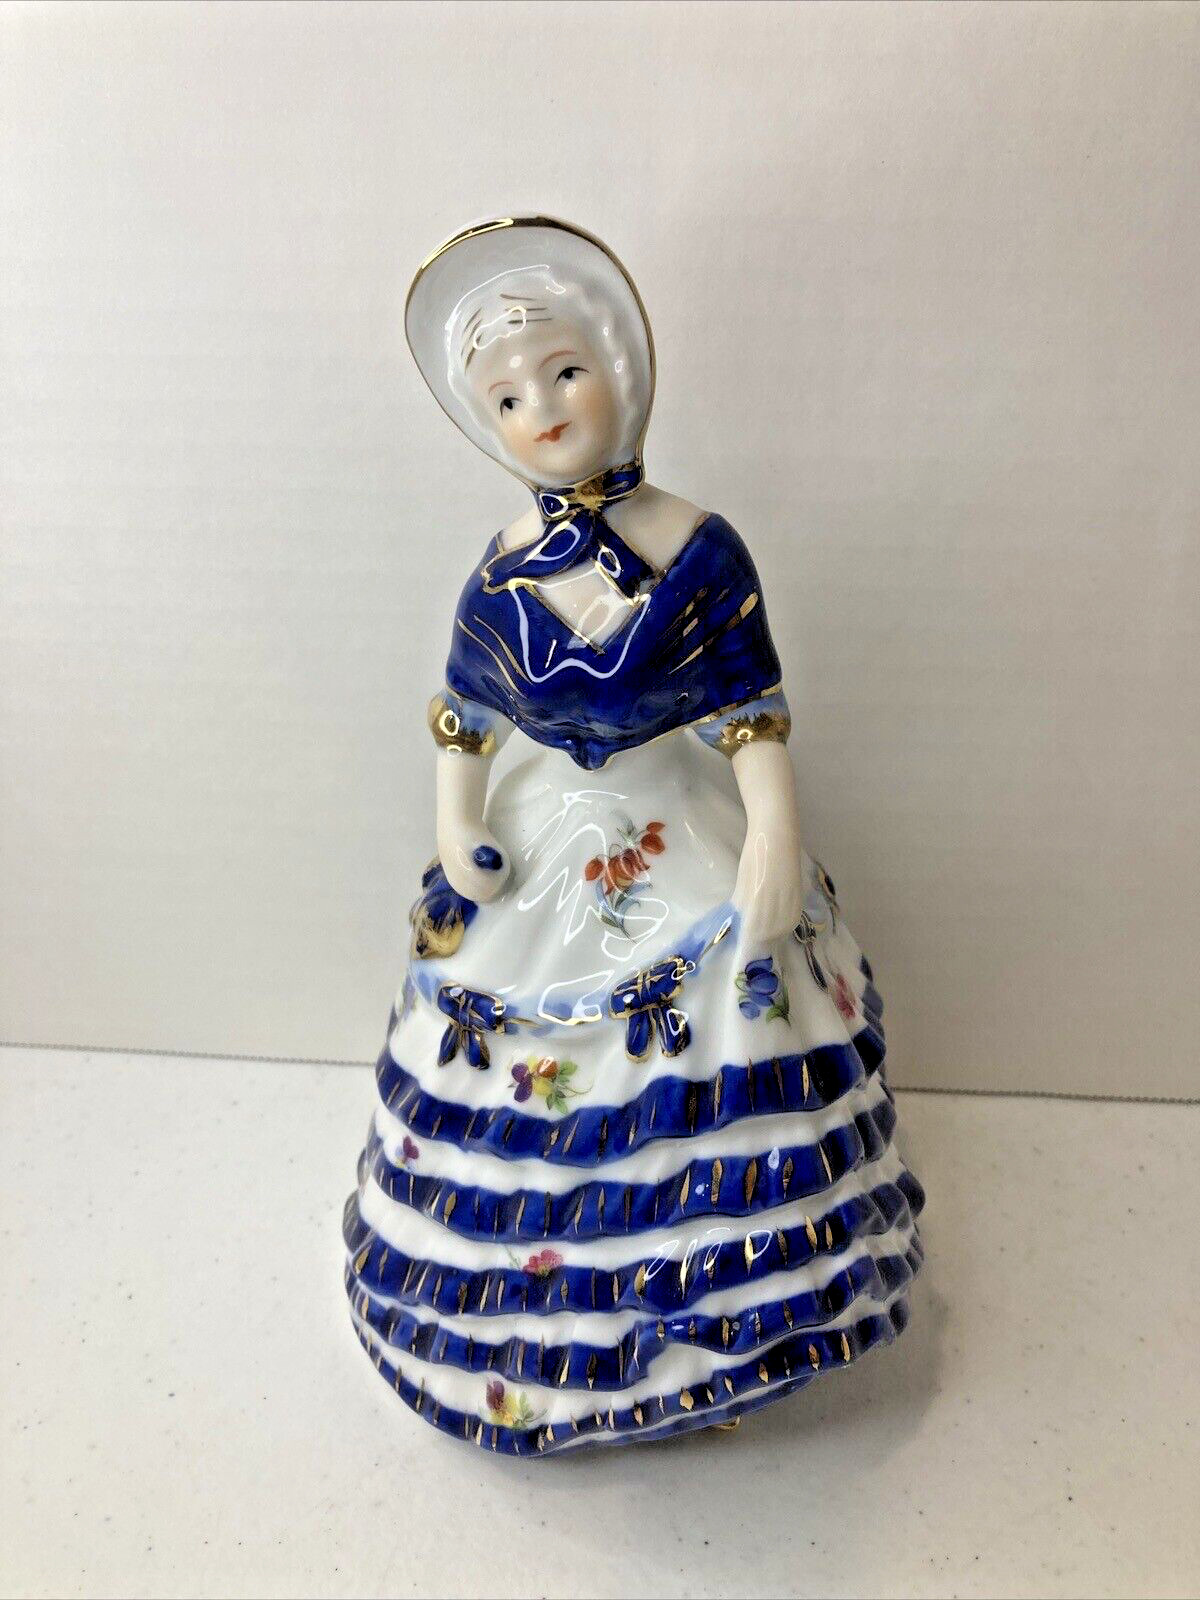 Victorian Lady Figurine KPM Berlin Germany Porcelain Blue and White Gold Dress